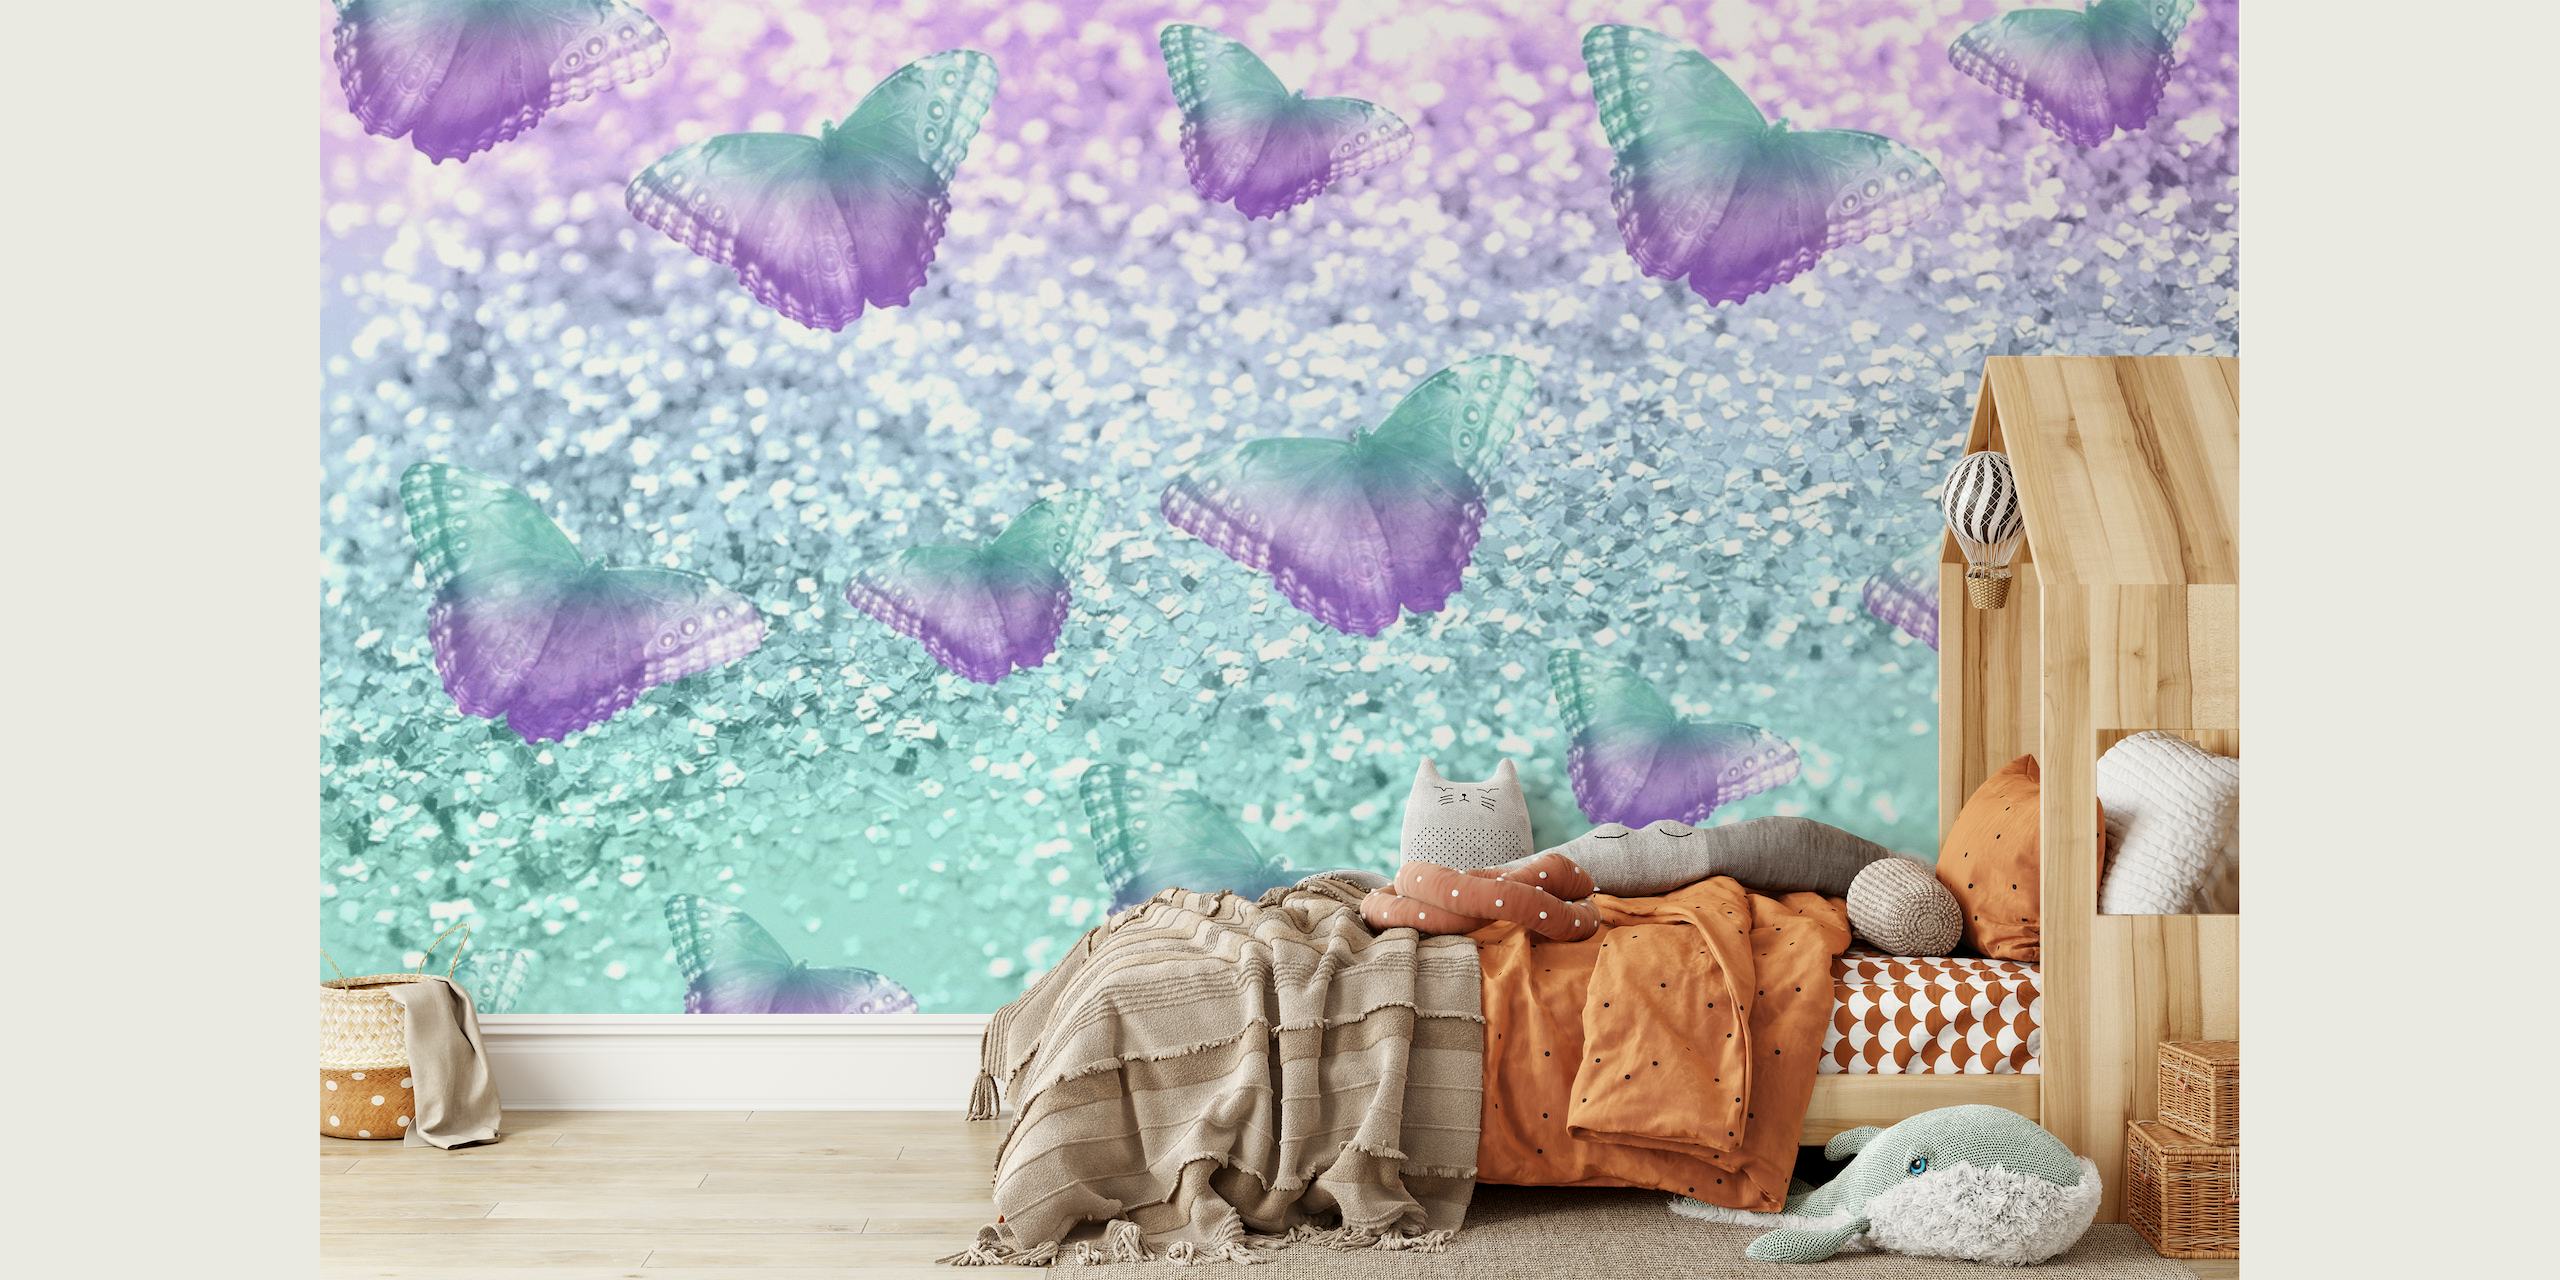 Mermaid Butterfly Glitter 2 wall mural with butterflies and glittery underwater theme